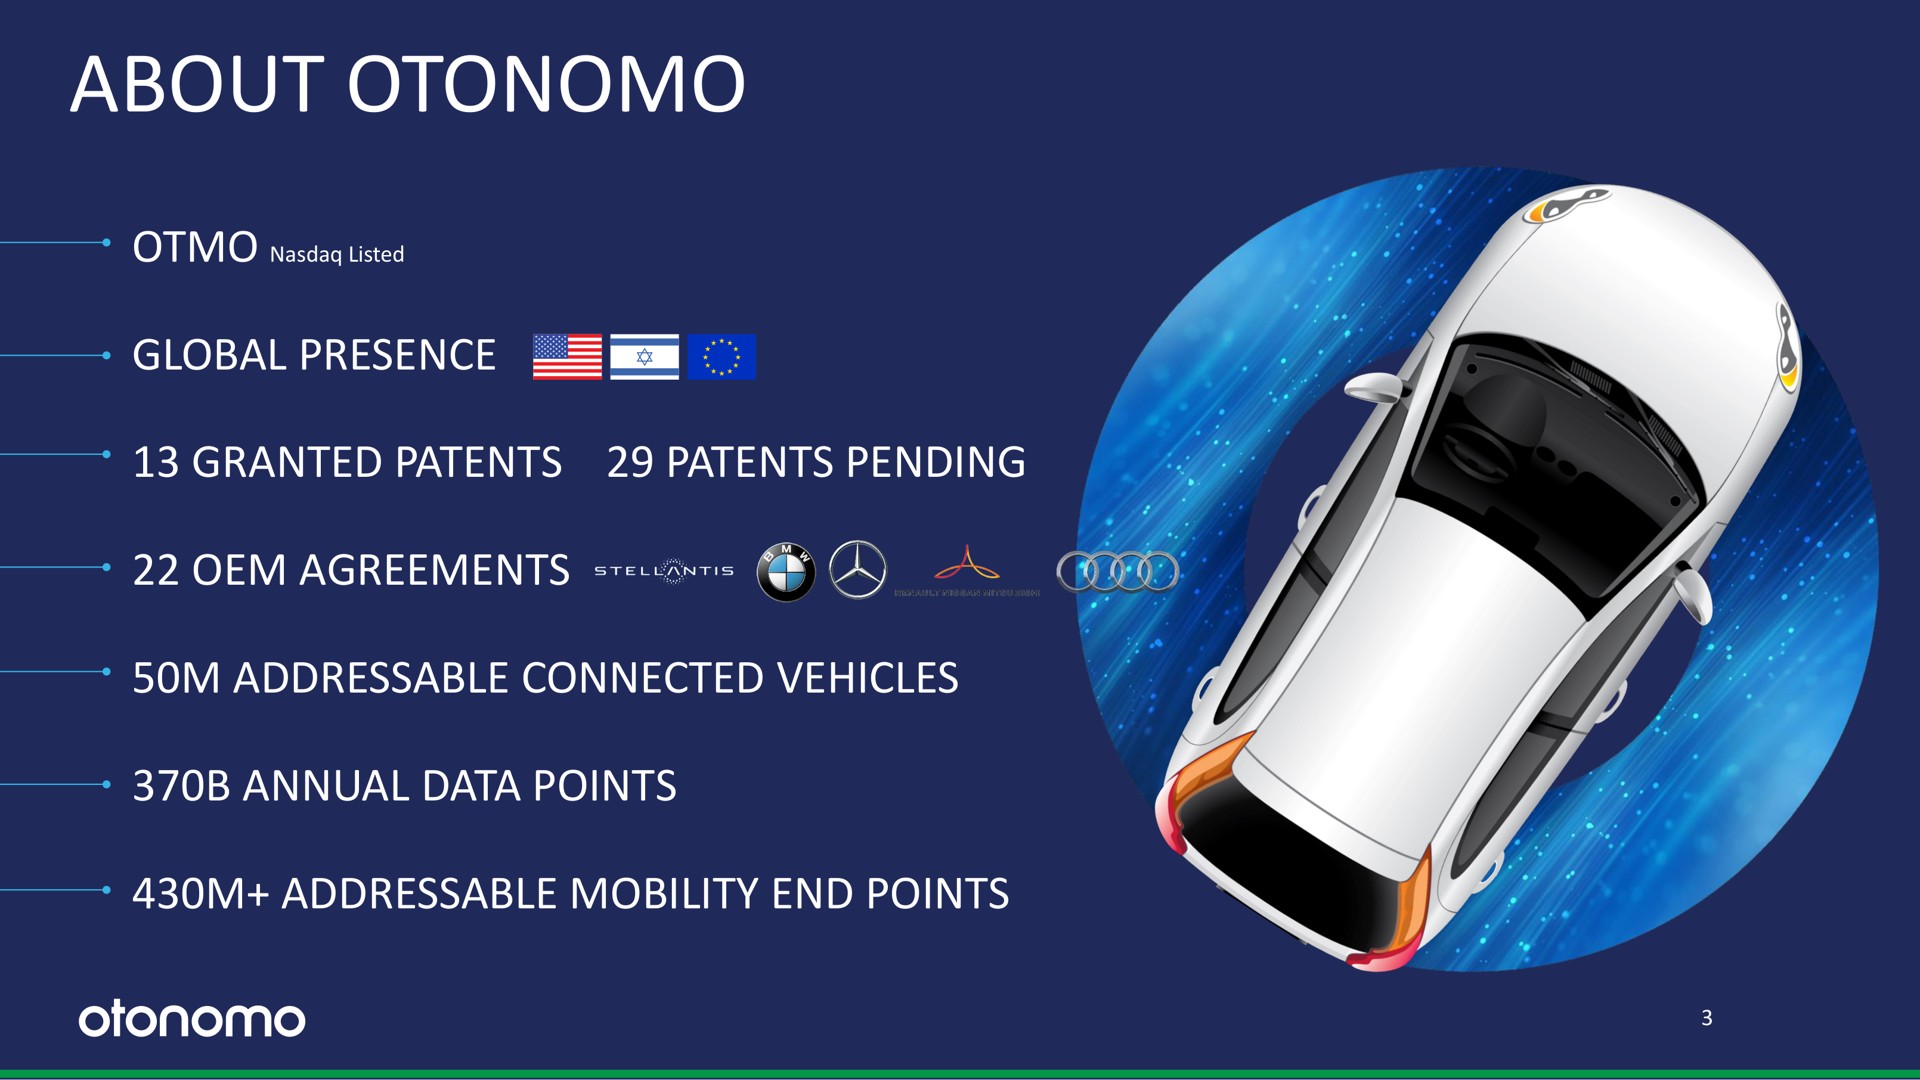 about global presence granted patents patents pending agreements connected vehicles annual data points mobility end points a cite | Otonomo